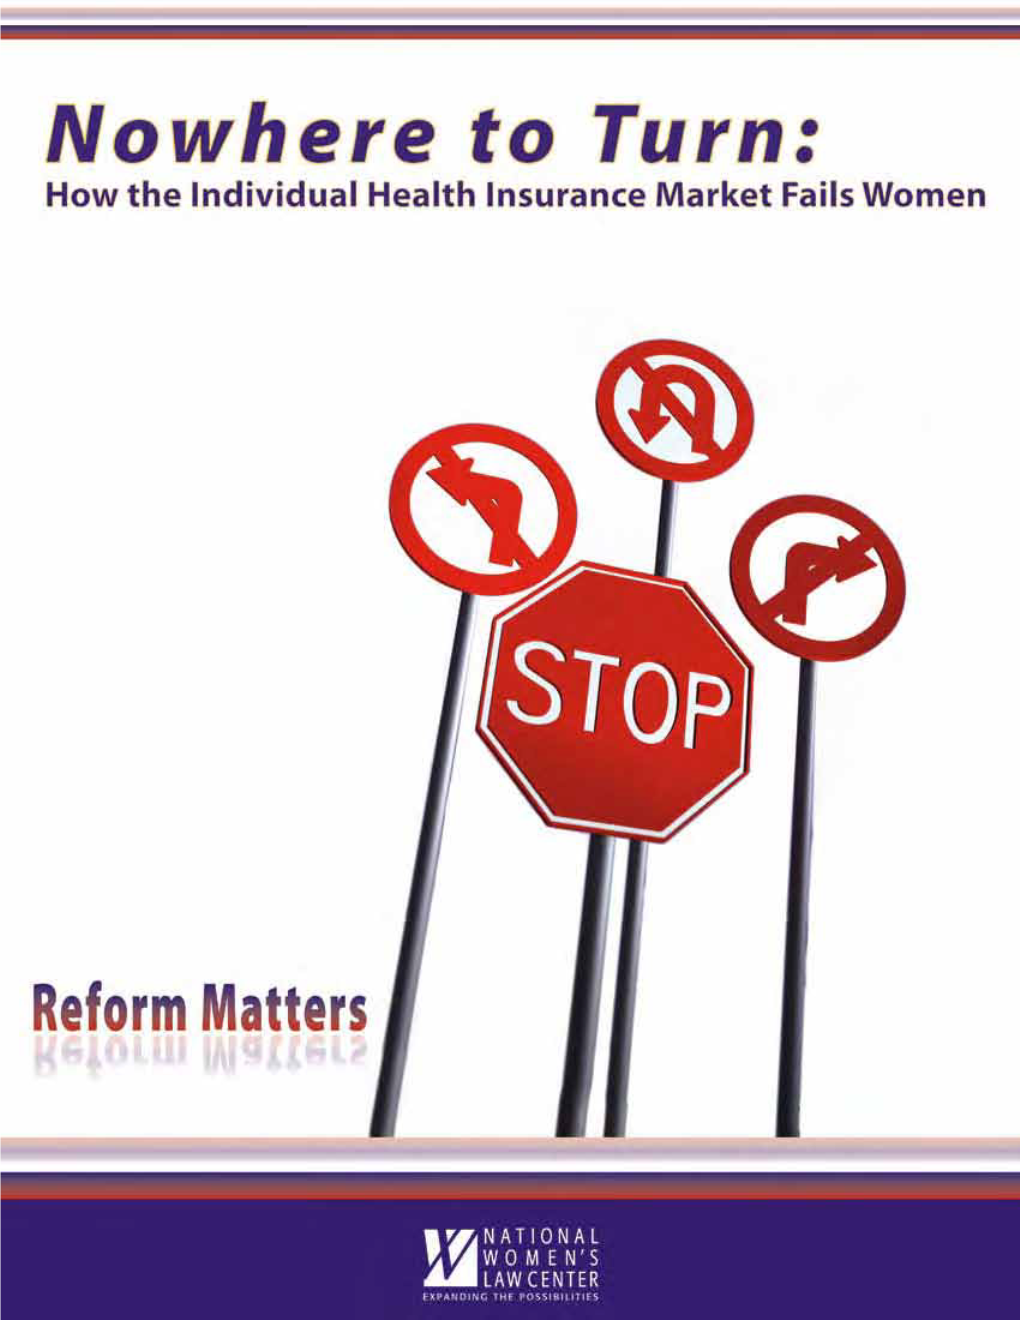 Nowhere to Turn 3 Based on This Research, NWLC Found That the Individual Insurance Market Is a Very Difficult Place for Women to Buy Health Coverage